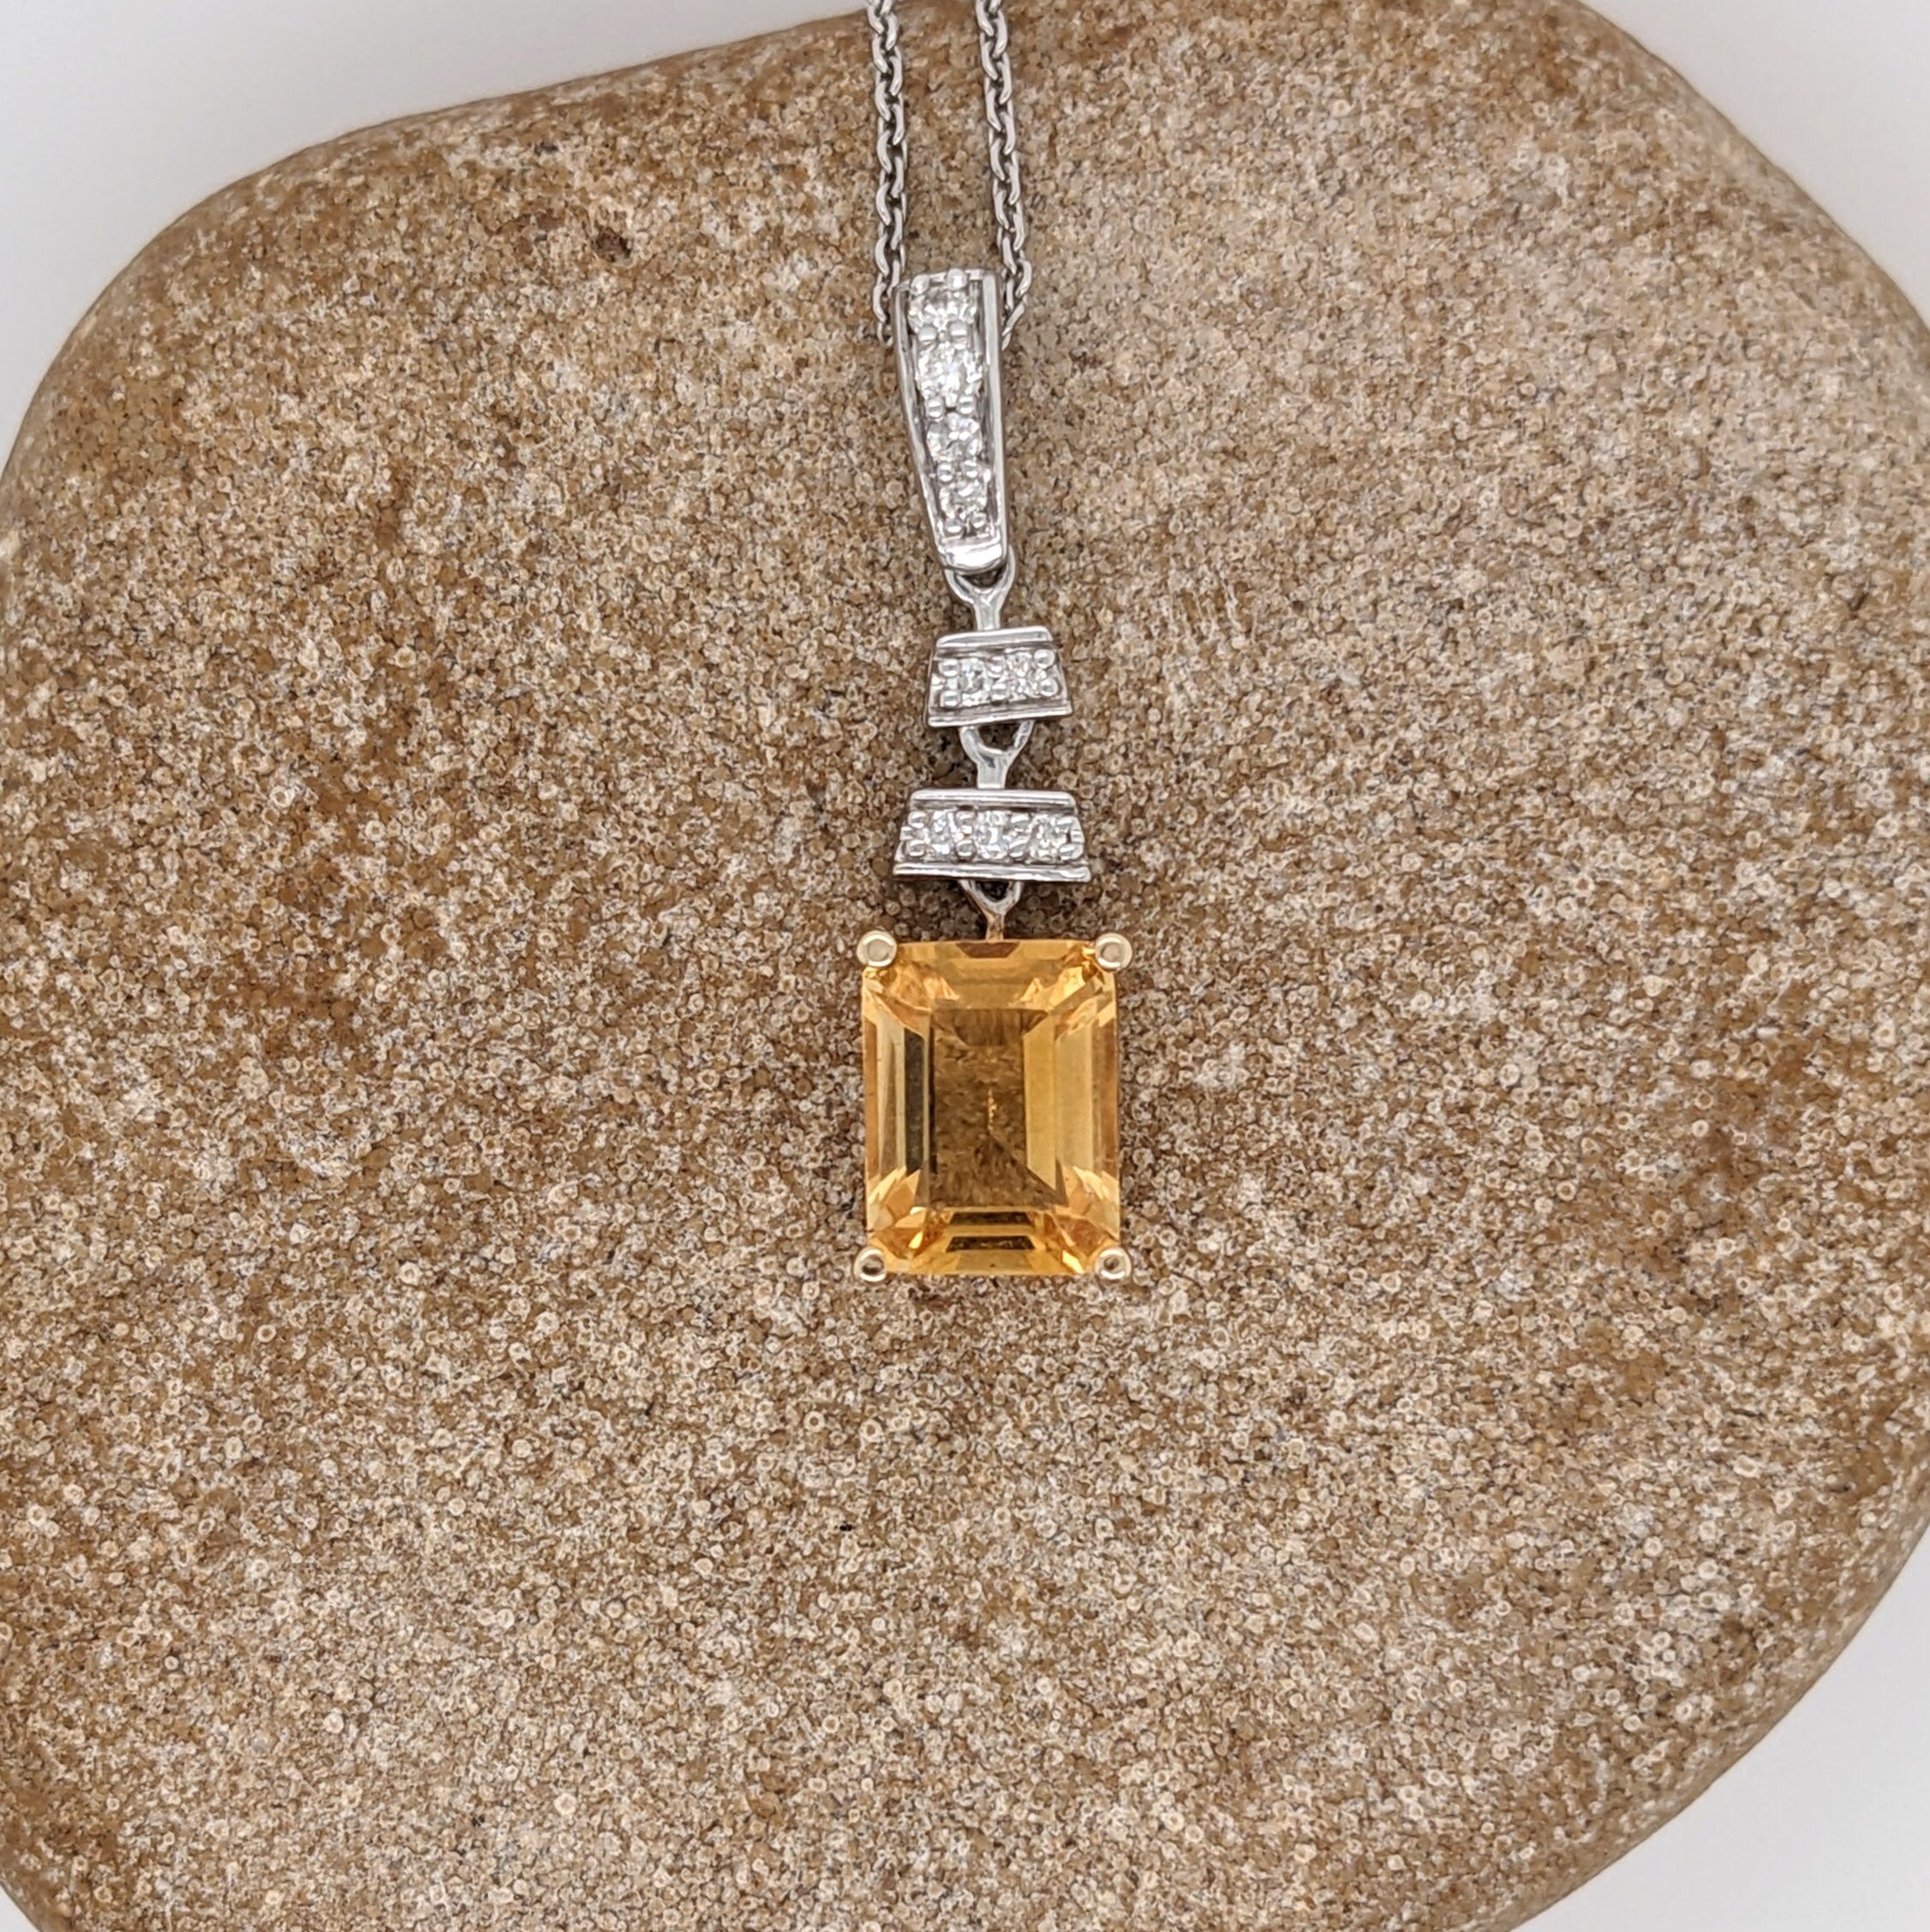 Emerald Cut Citrine Dangle Pendant in Solid 14k Dual Tone White and Yellow Gold w Natural Diamond Accents | Oval 8x6mm | November Birthstone